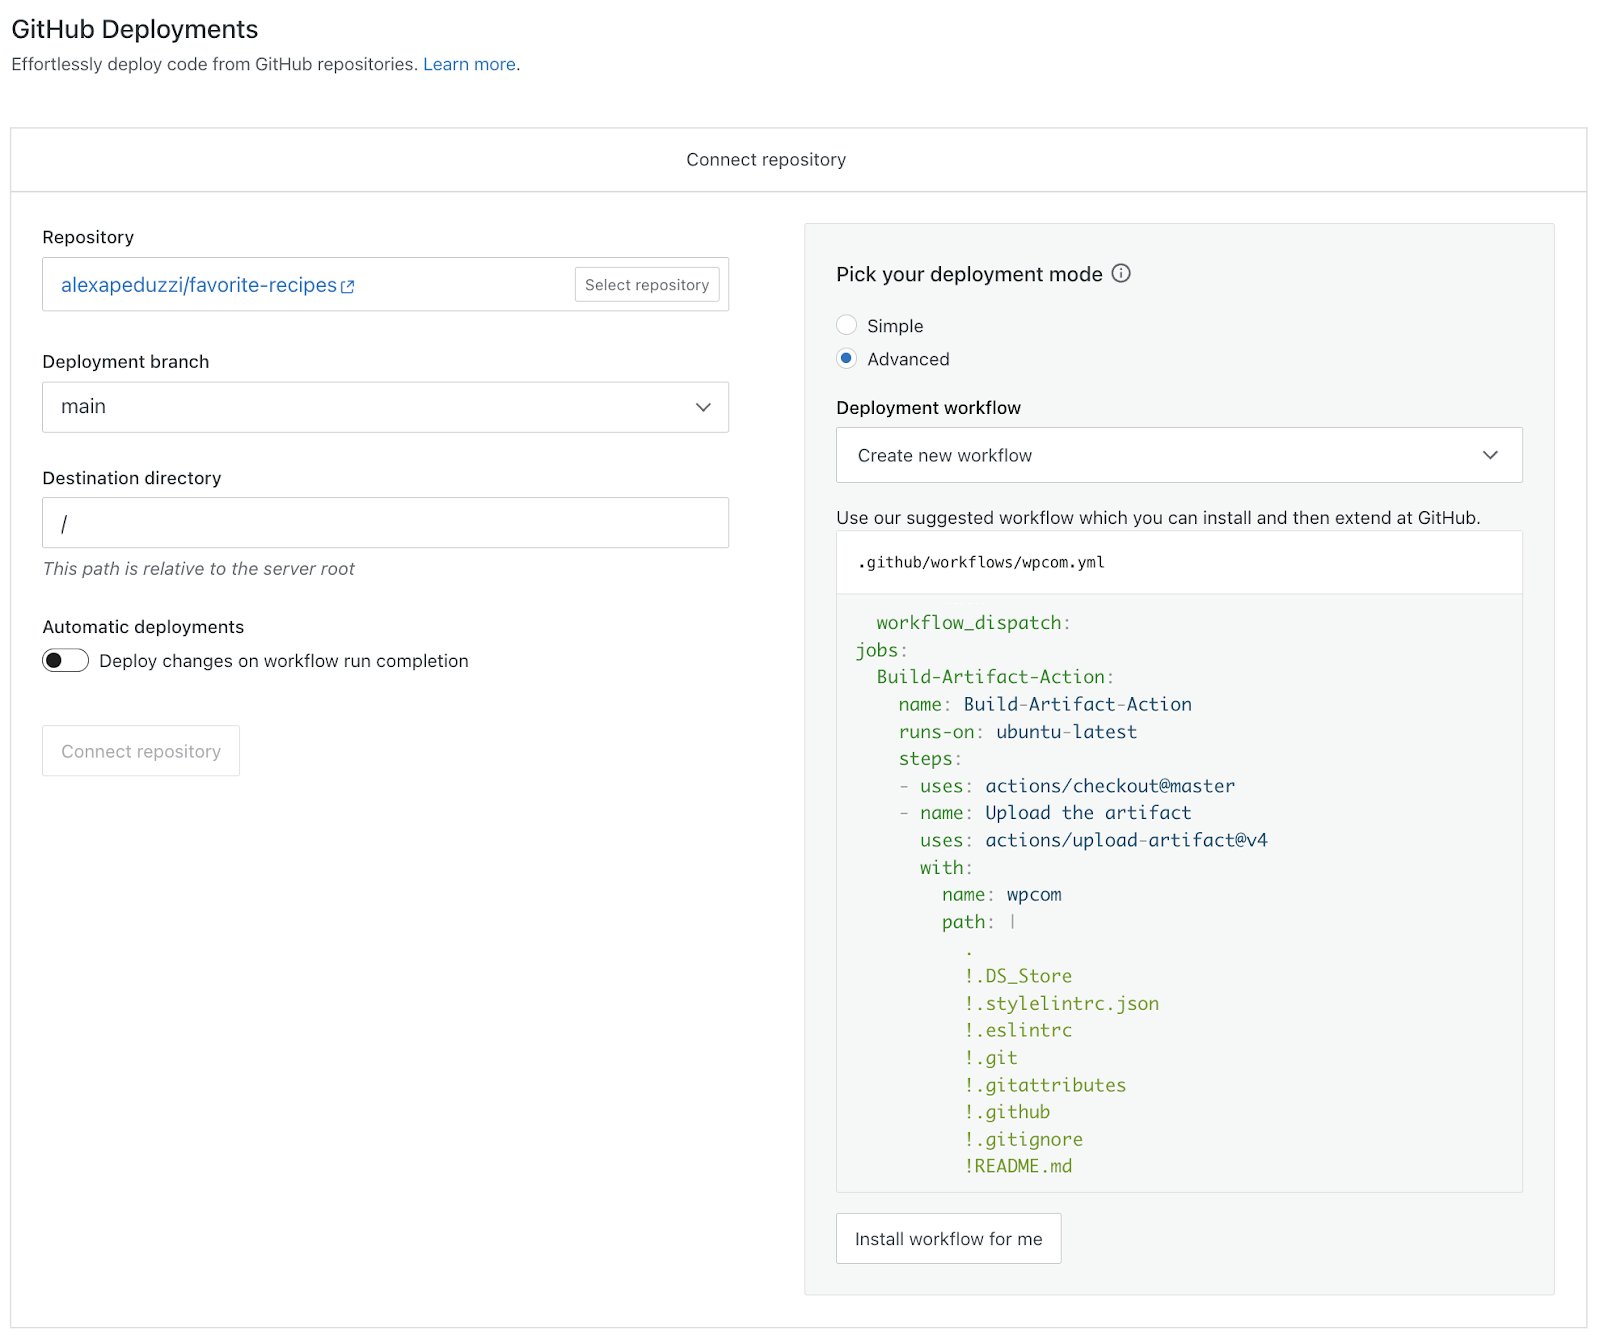 WordPress.com's GitHub Deployments page for connecting repositories with fields for Repository, Deployment branch, Destination directory, and Automatic deployments. Advanced deployment mode is selected, showing a workflow.